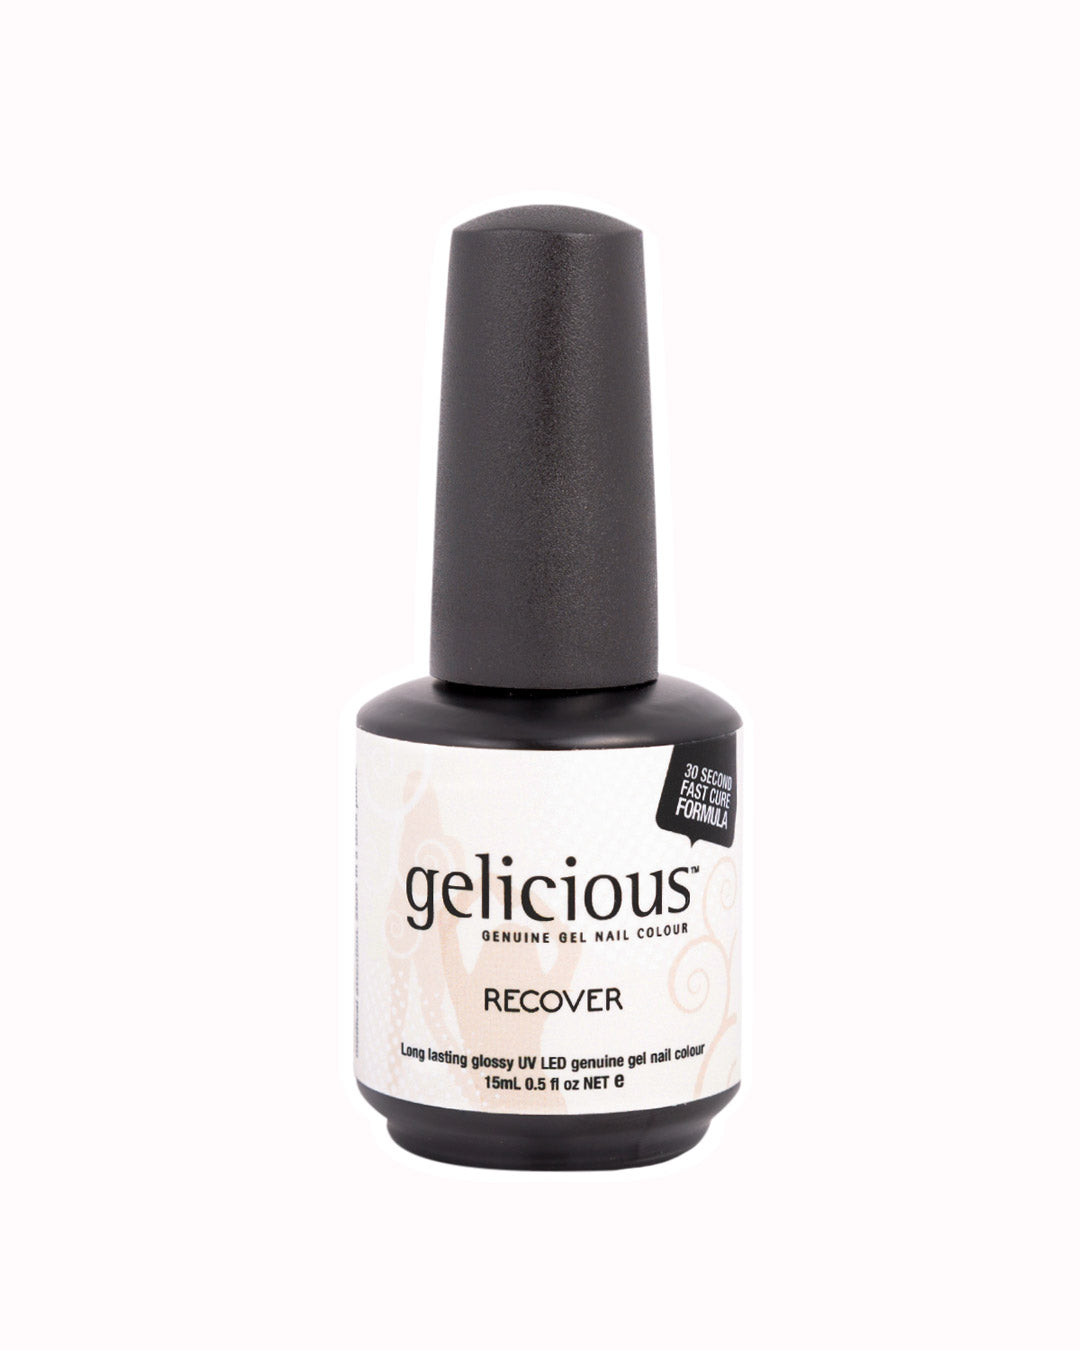 Gelicious Recover